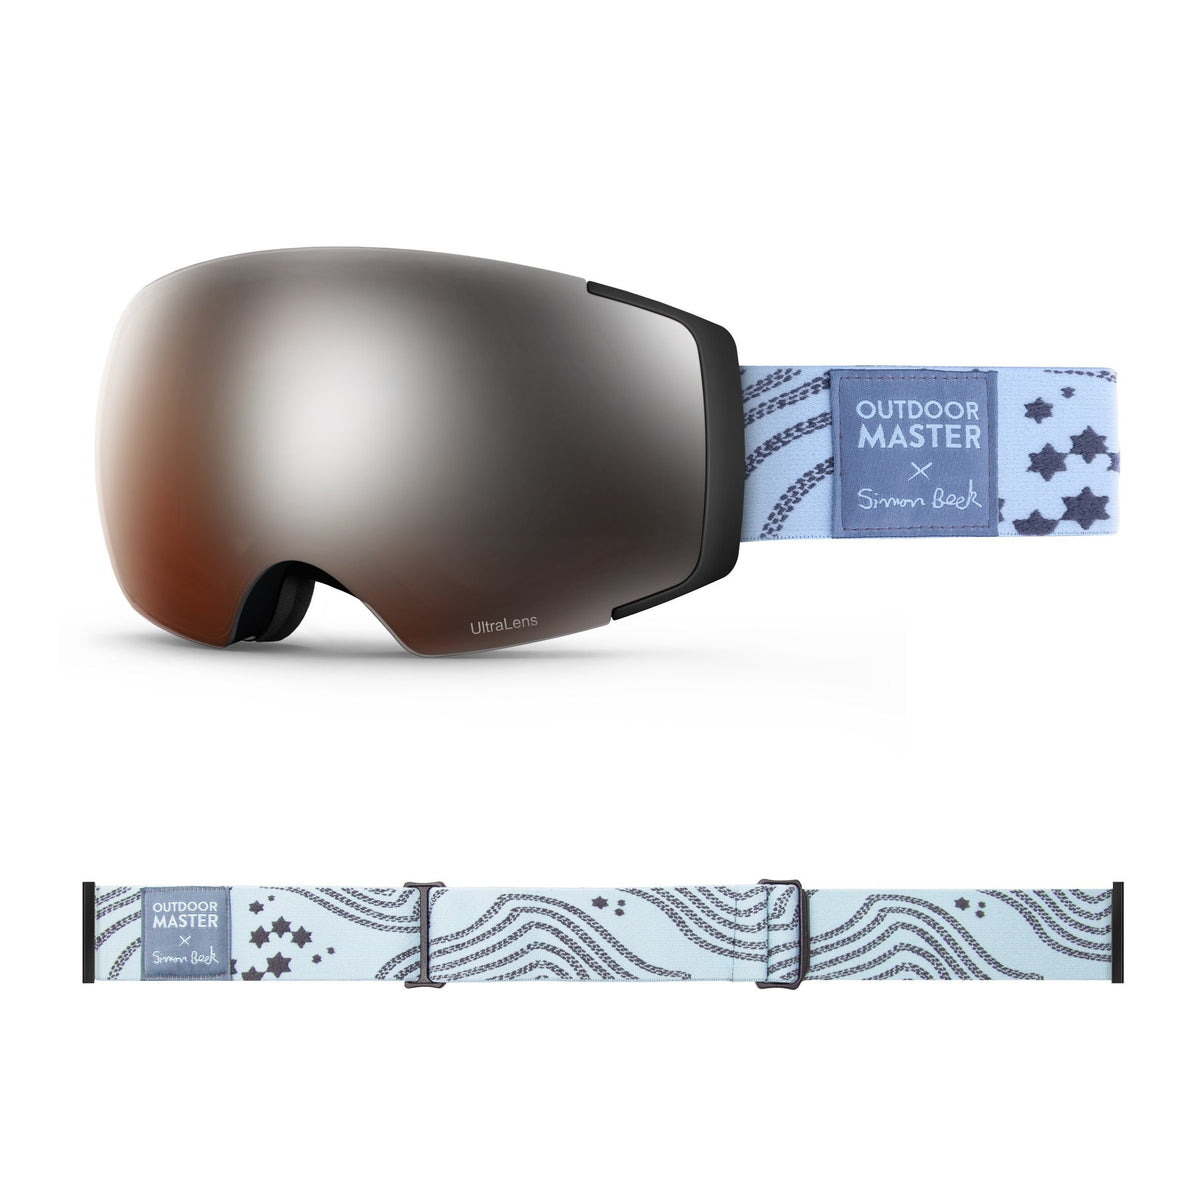 OutdoorMaster x Simon Beck Ski Goggles Pro Series - Snowshoeing Art Limited Edition OutdoorMaster LutraLens VLT 13% Optimized Orange with REVO Silver Star Road-Lightsteelblue